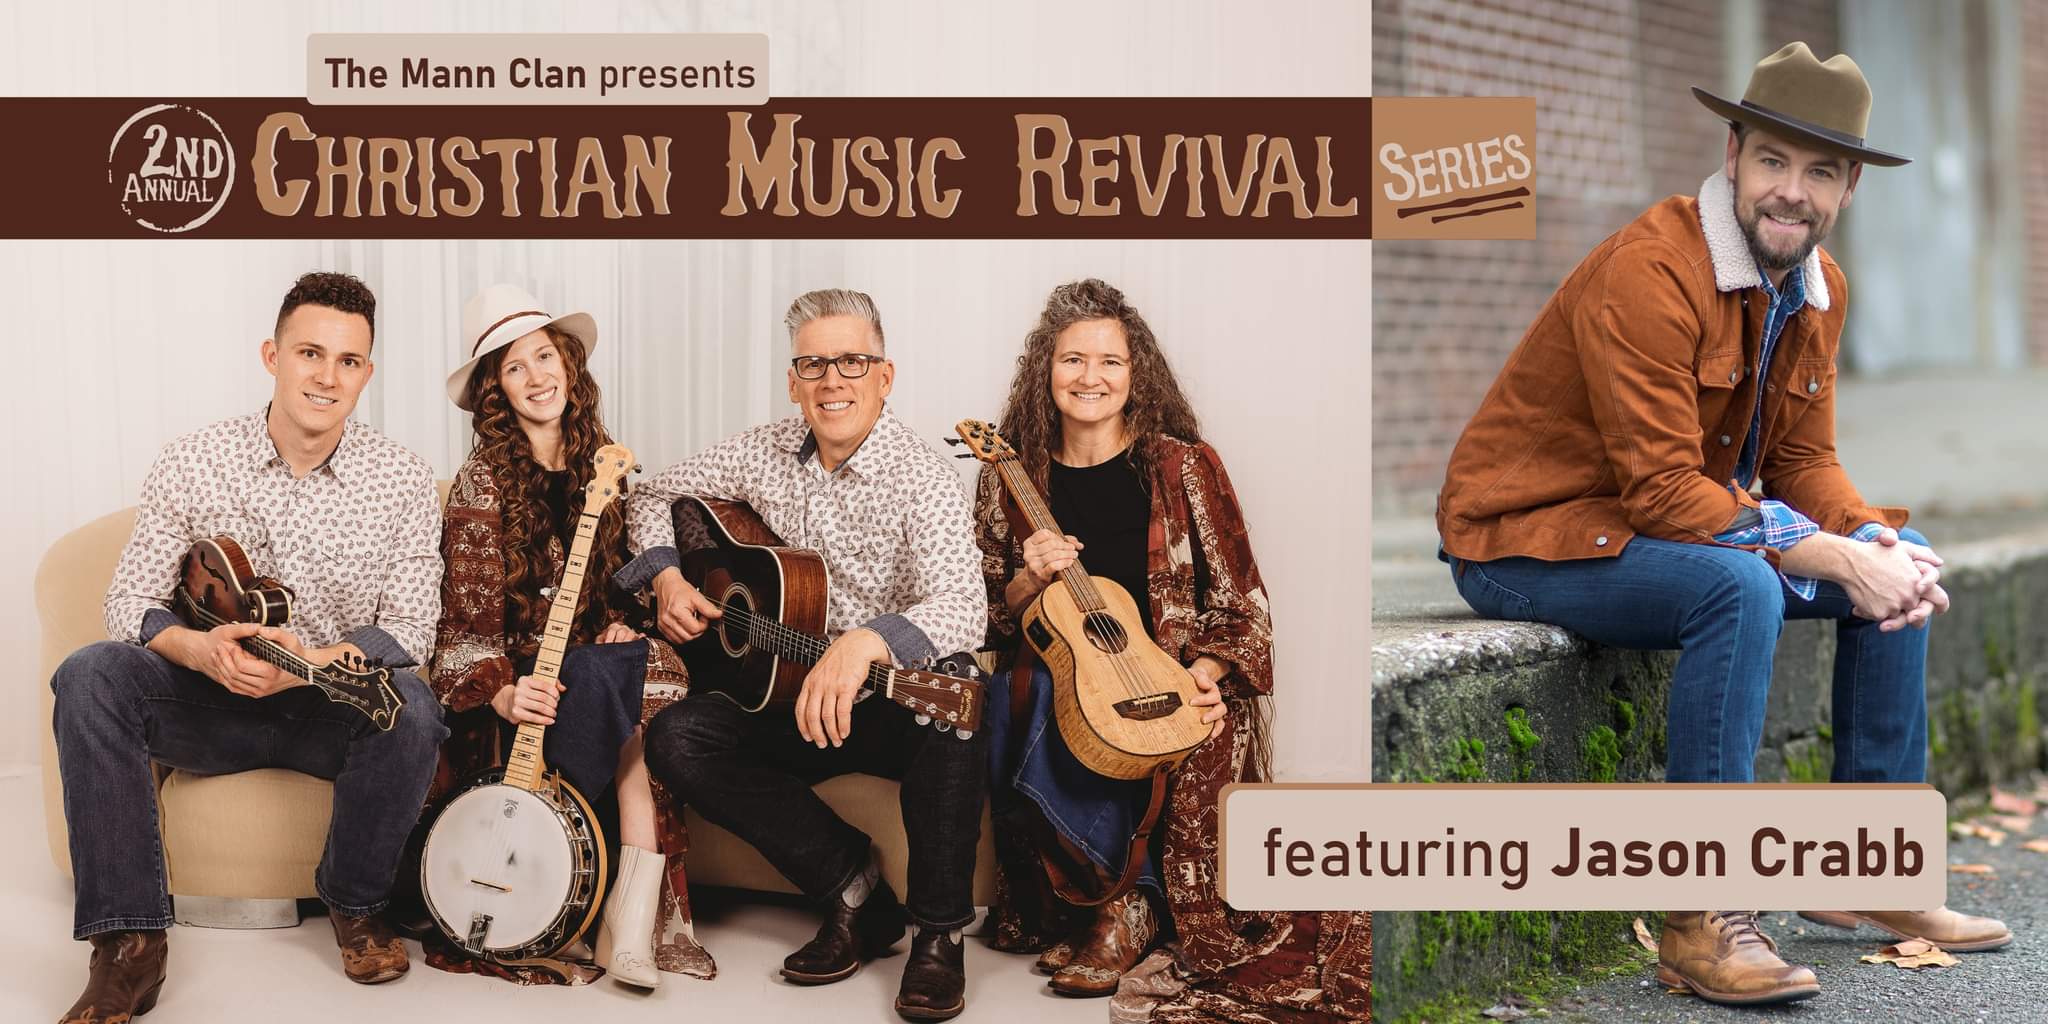 2nd Annual Christian Music Revival Event